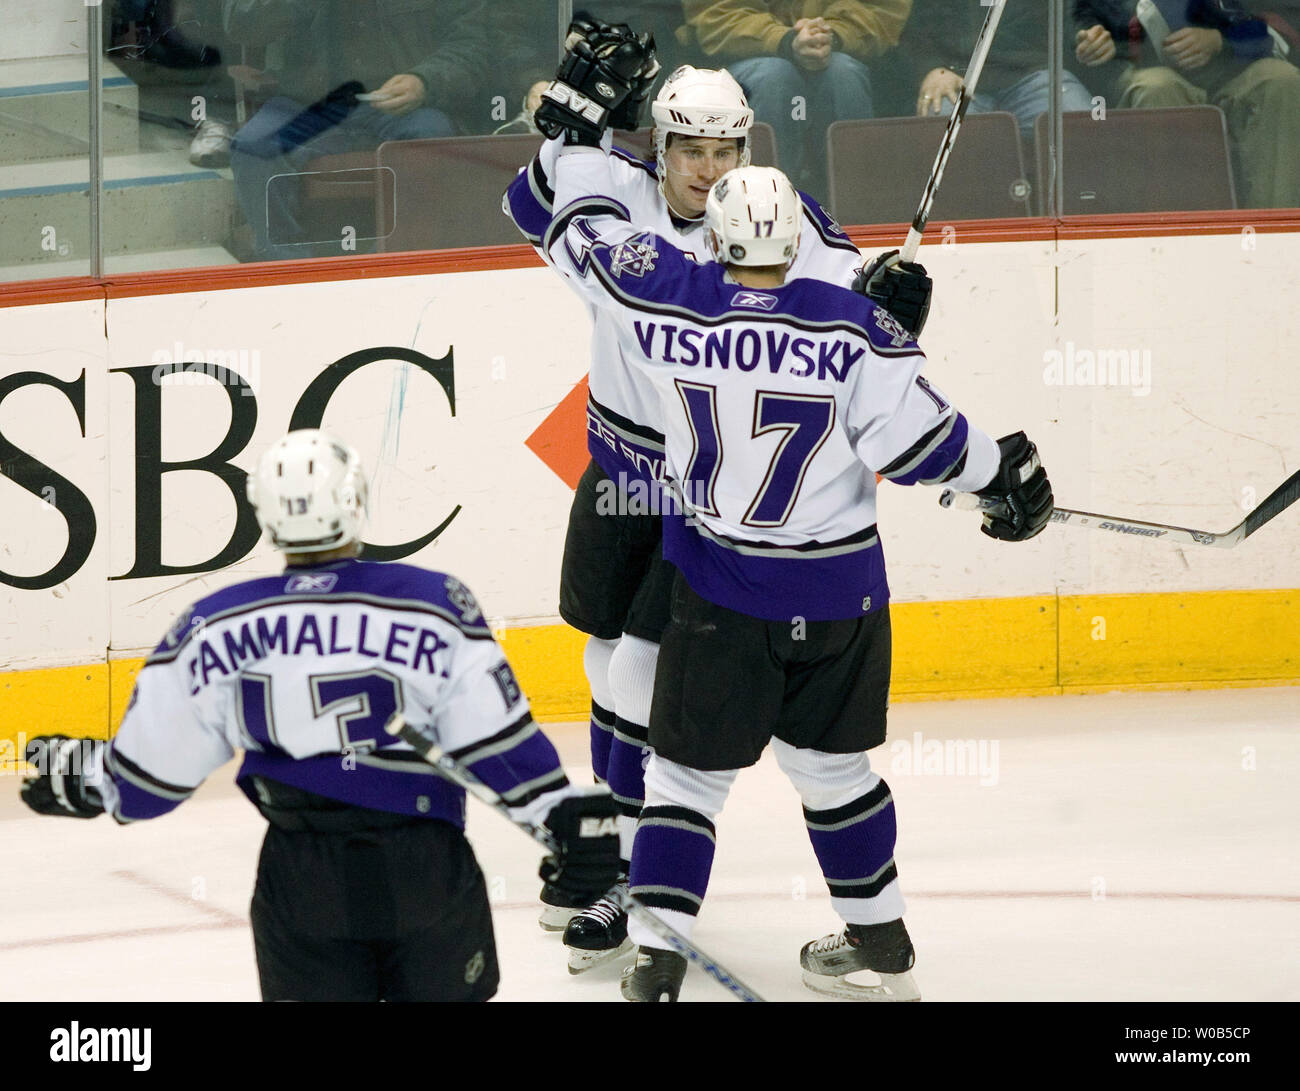 Los Angeles Kings Alexander Frolov celebrates scoring against the Vancouver Canucks with teammates Lubomir Visnovsky #17 and Michael Cammalleri #13 during the first period at Vancouver's GM Place, January 26, 2007. Kings won 3-2. (UPI Photo/Heinz Ruckemann) Stock Photo